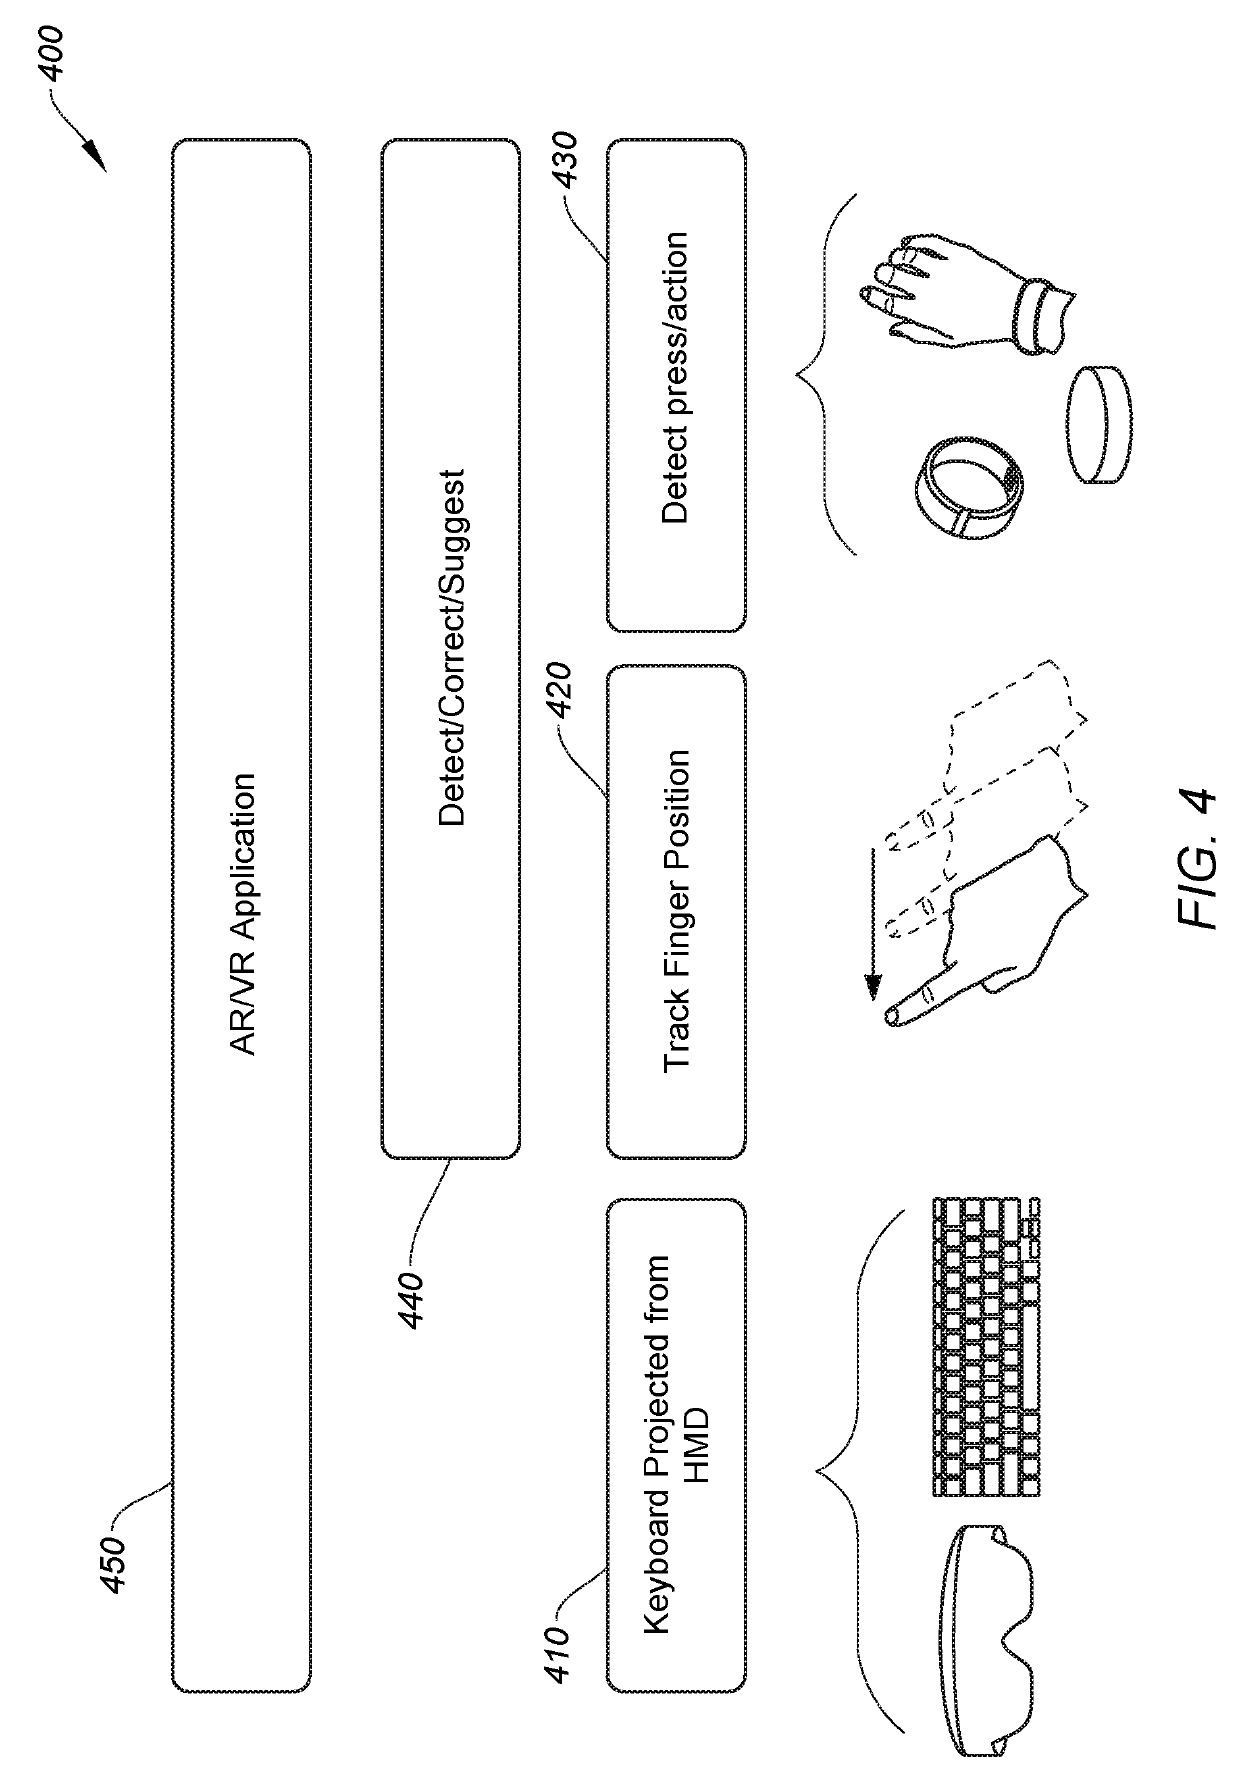 Precision tracking of user interaction with a virtual input device